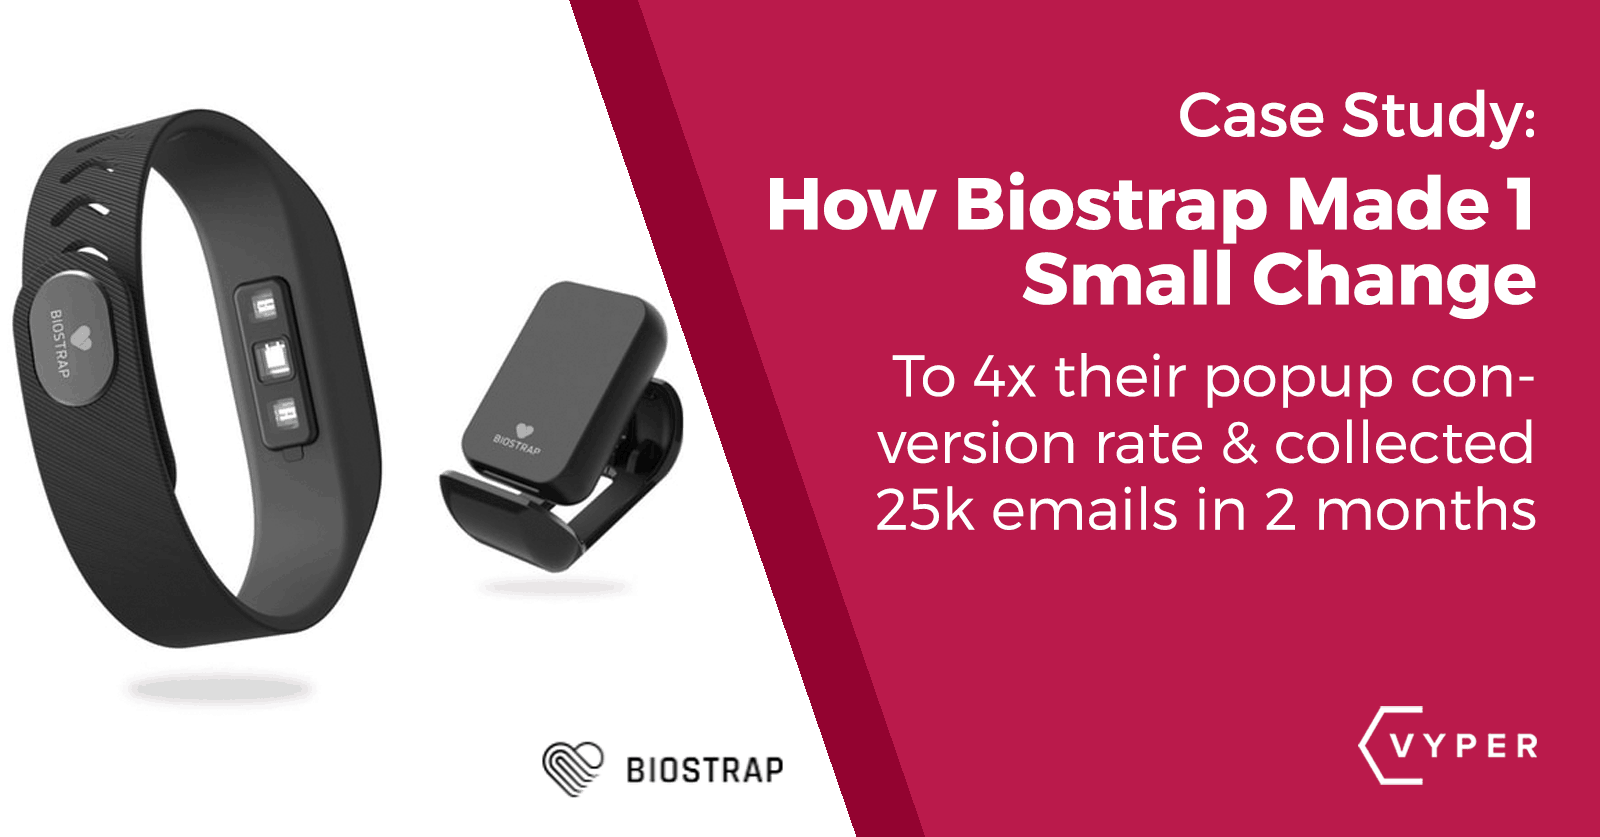 Case Study: How Biostrap 4x’d Their Popup Conversion Rate & Collected 25k Emails in 2 Months